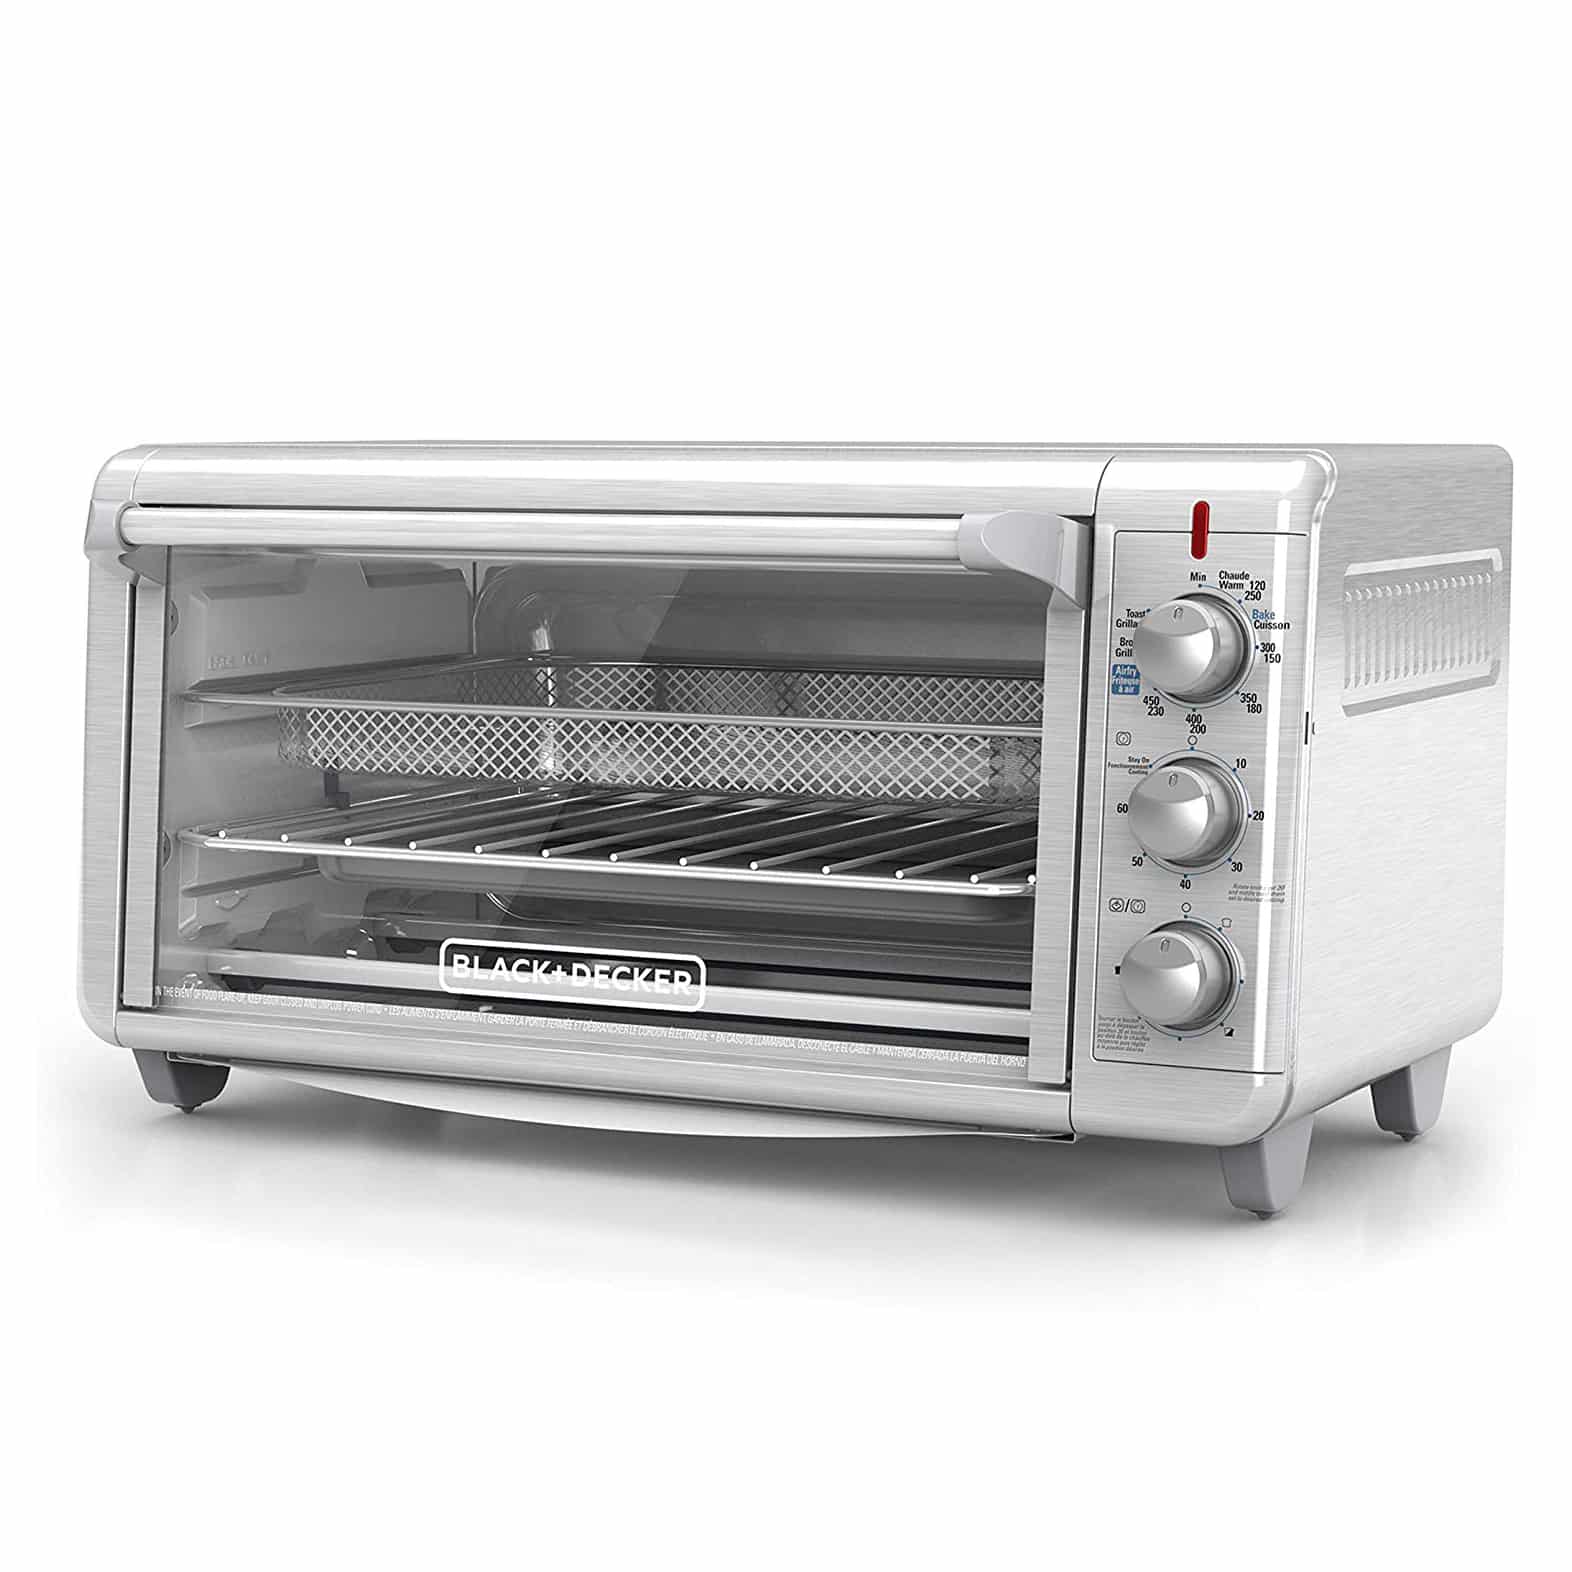 BLACFK+DECKER Extra-Larger Toast Oven